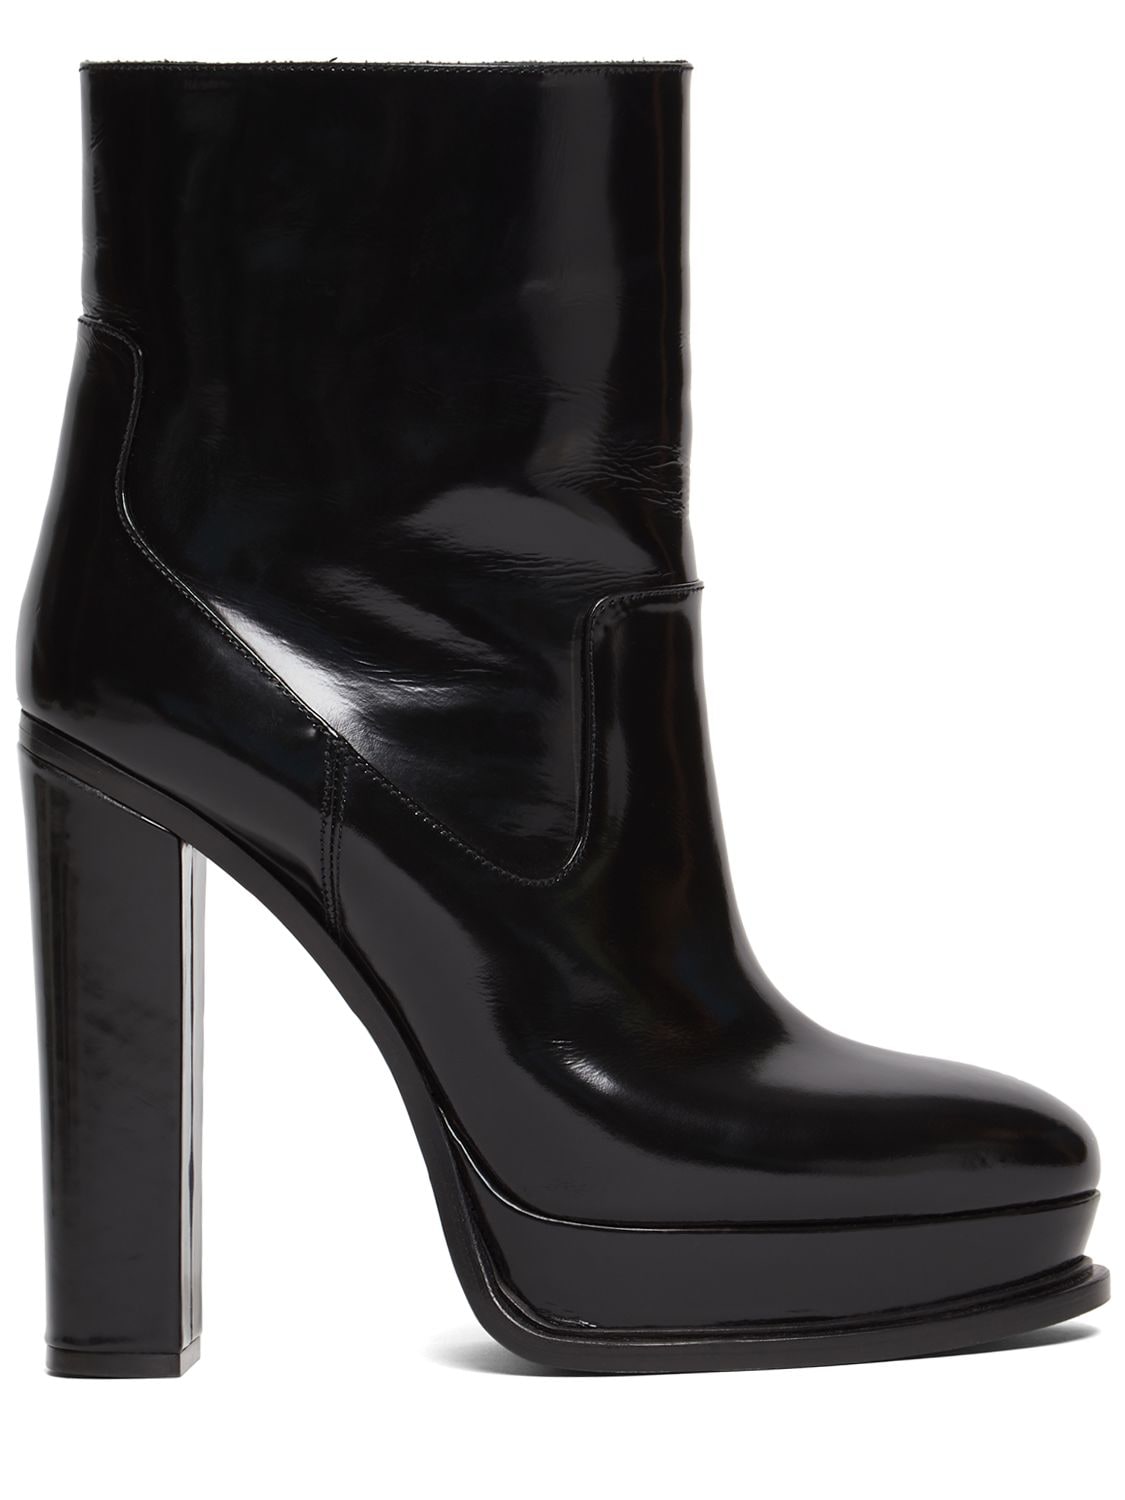 ALEXANDER MCQUEEN 120MM LEATHER ANKLE BOOTS